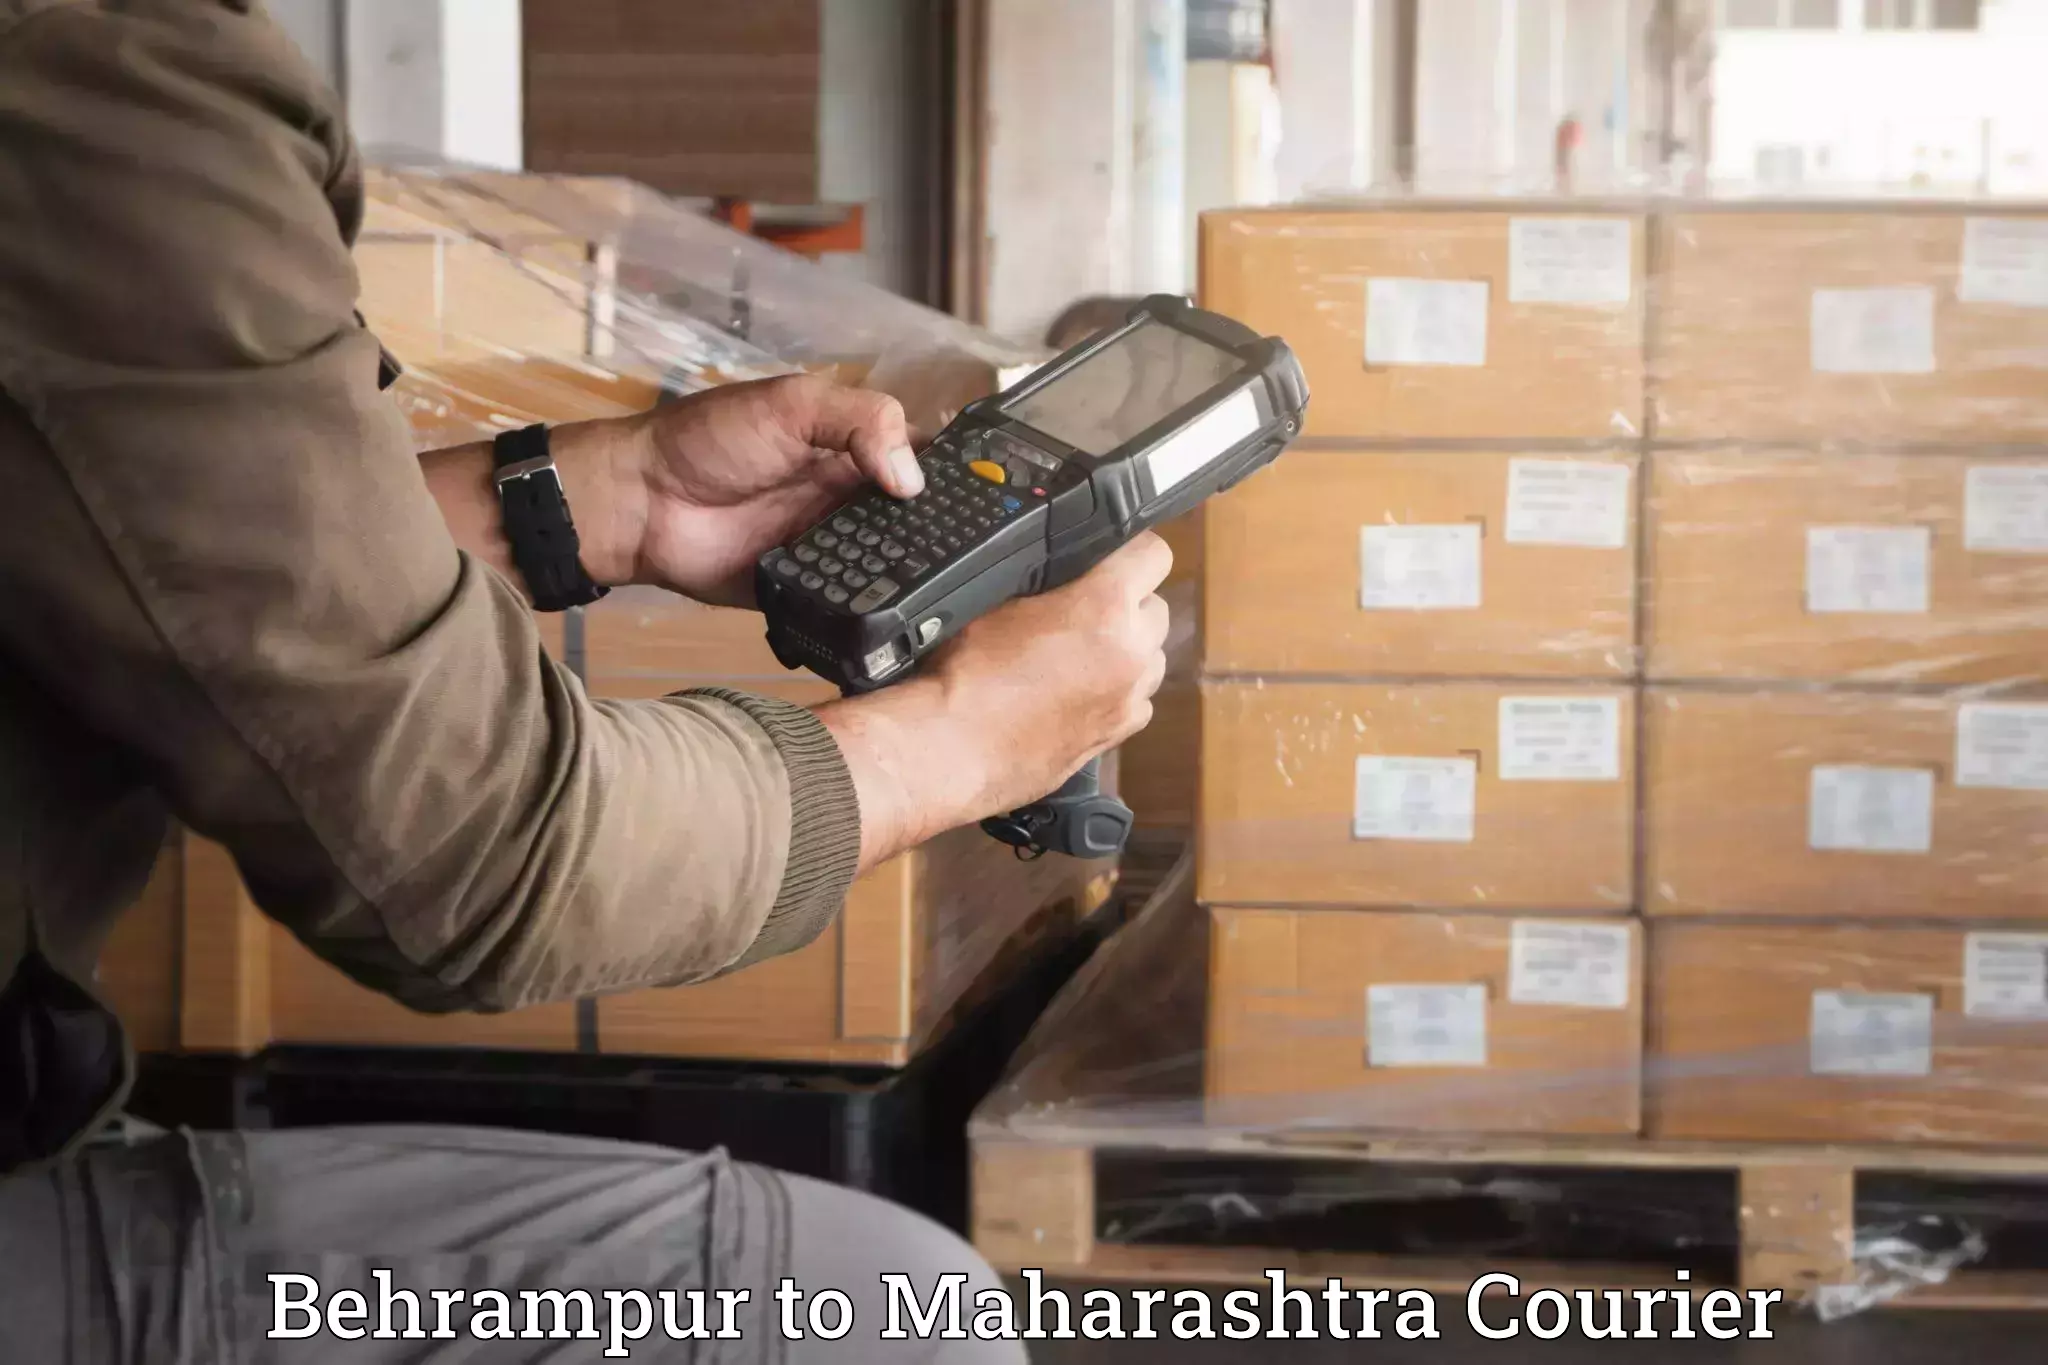 Efficient relocation services in Behrampur to Maharashtra